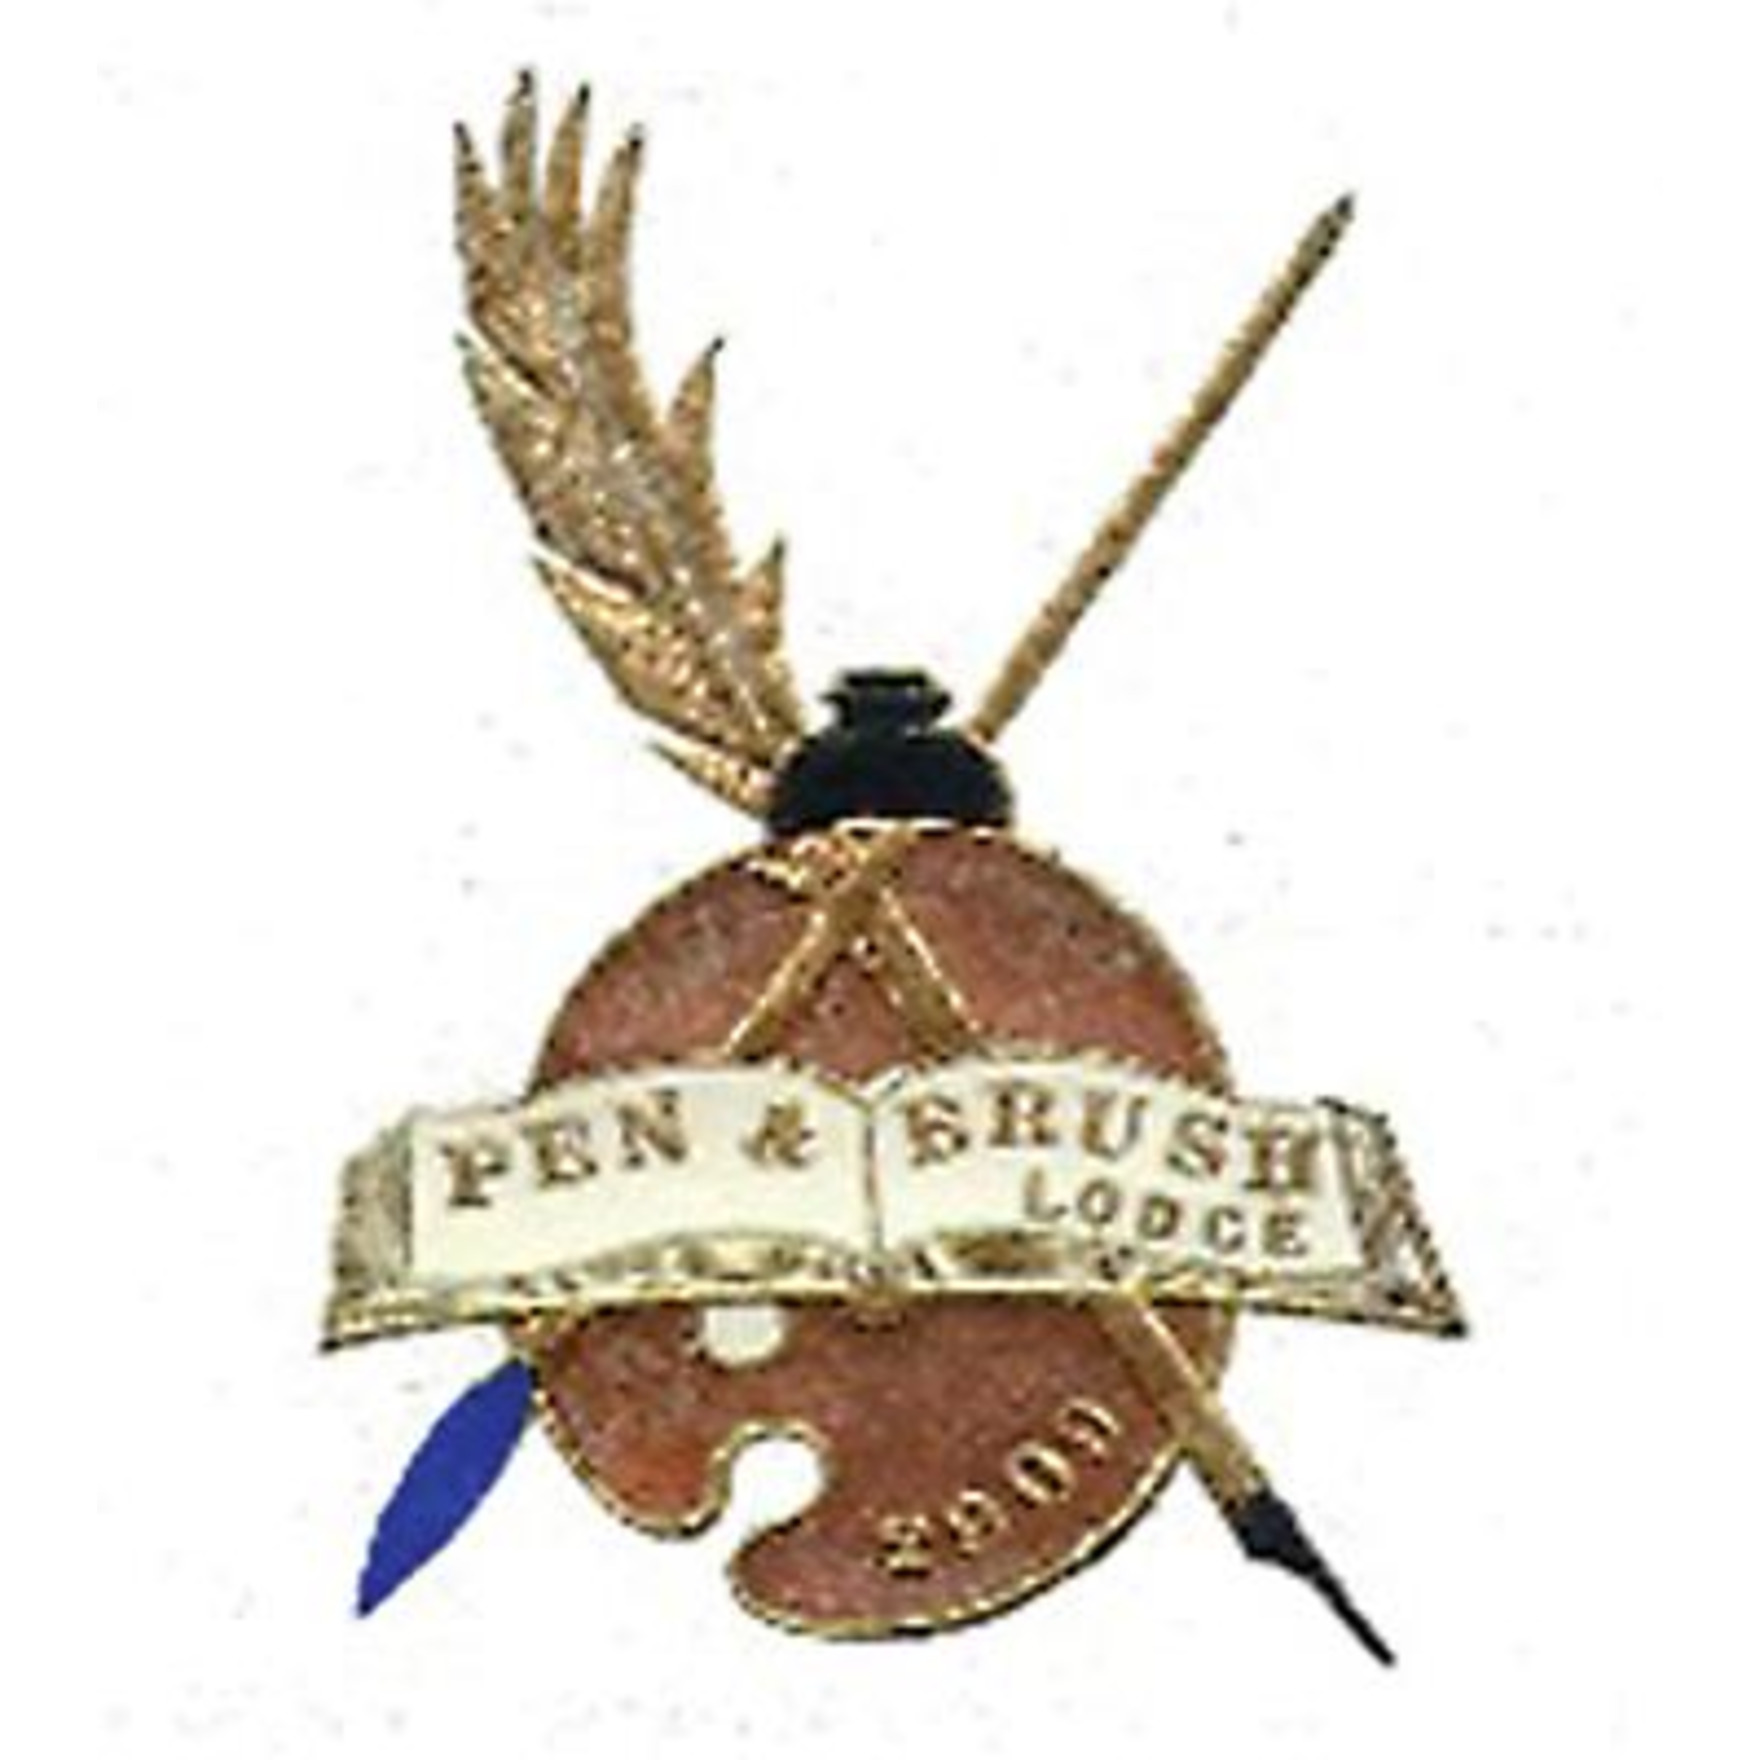 THE BRETHREN OF PEN AND BRUSH LODGE GIVE 26250 POUNDS TO THE FRONT LINE